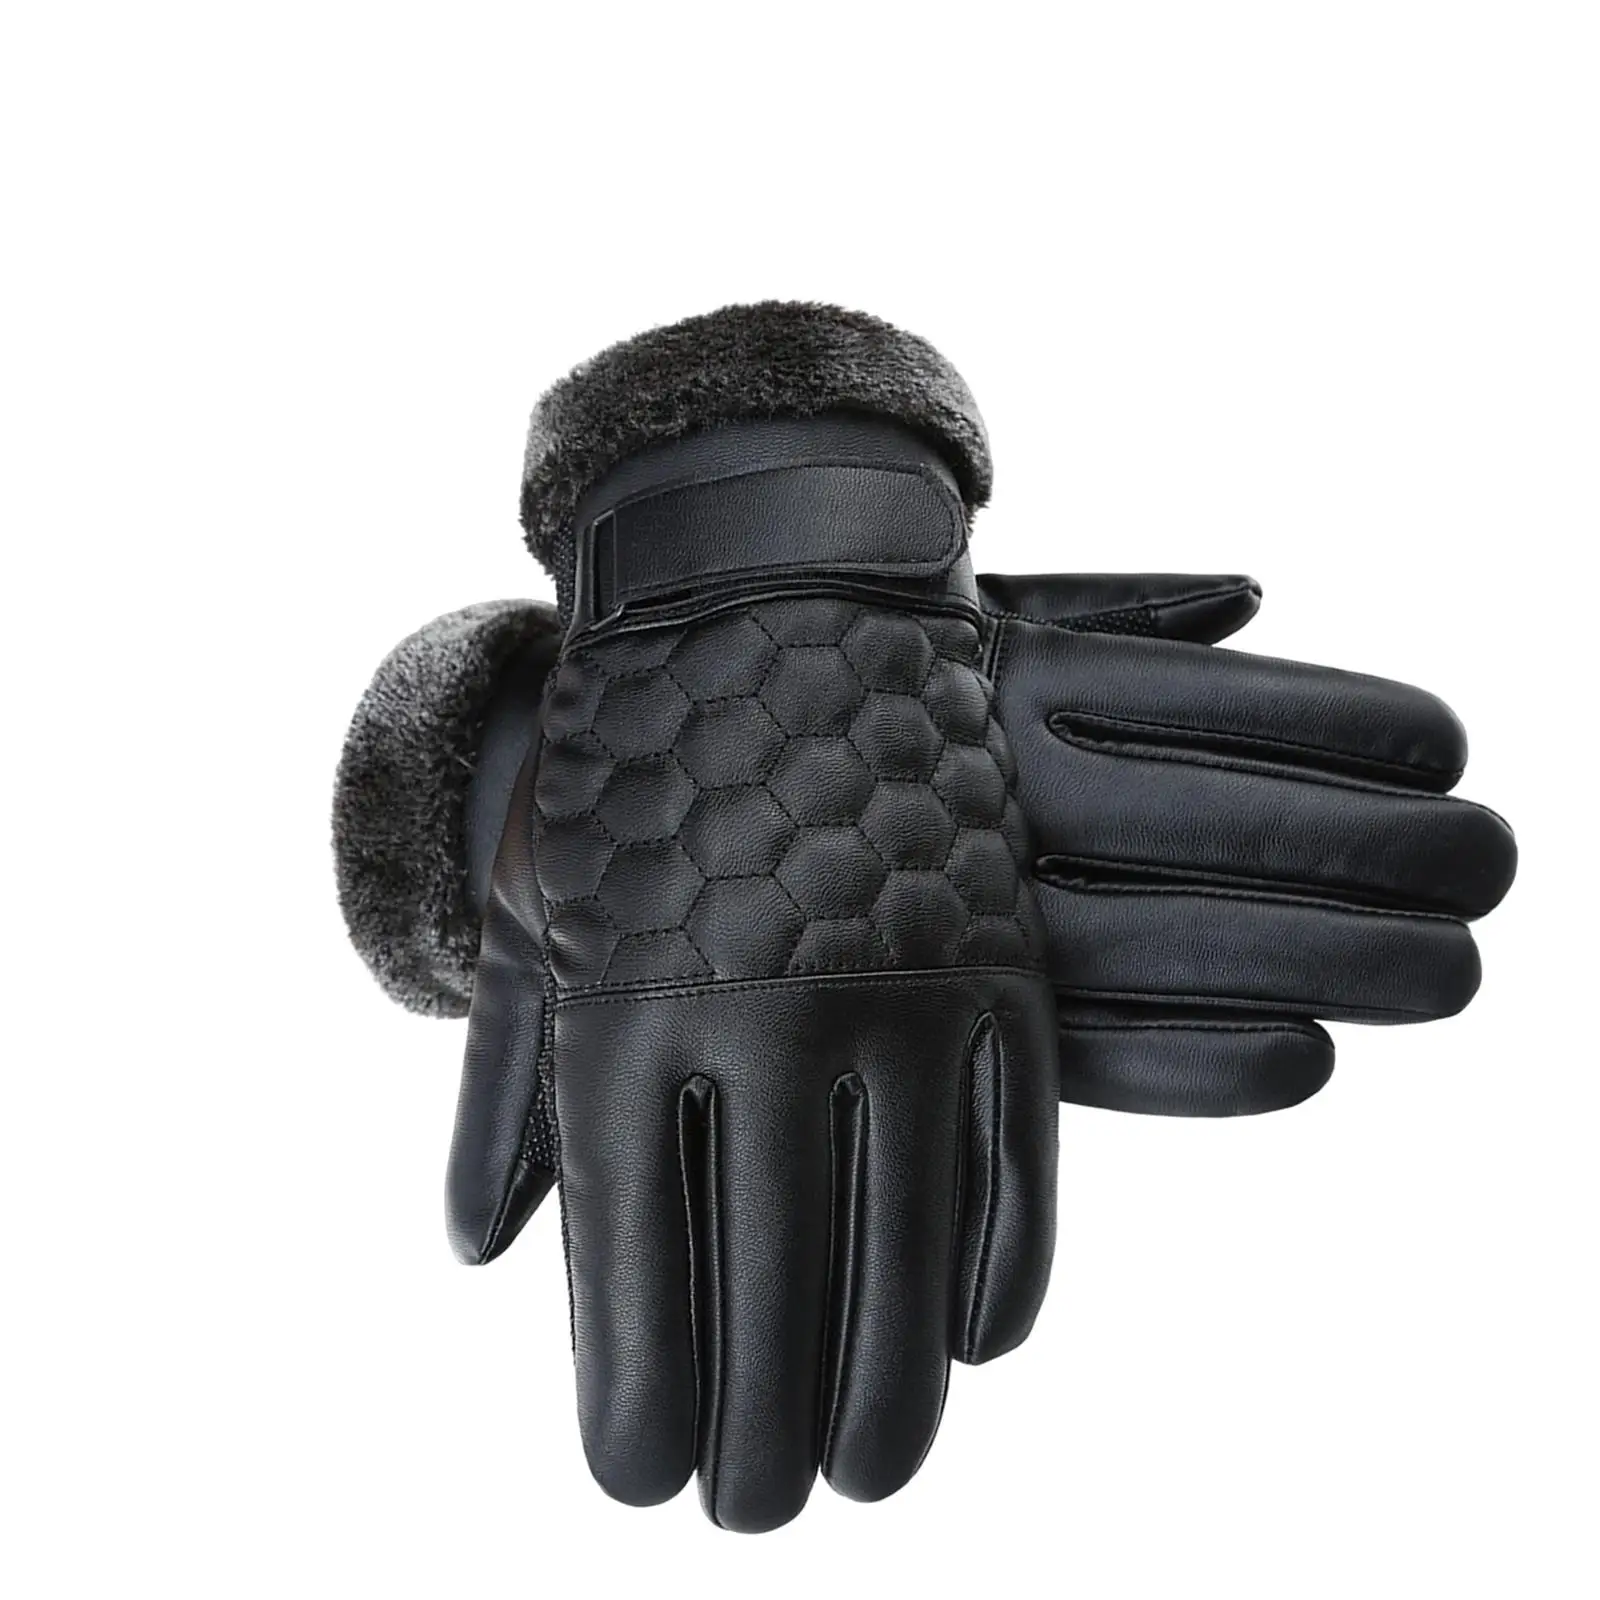 Winter Gloves Touchscreen Comfortable Durable Weather Resistant Thermal Gloves